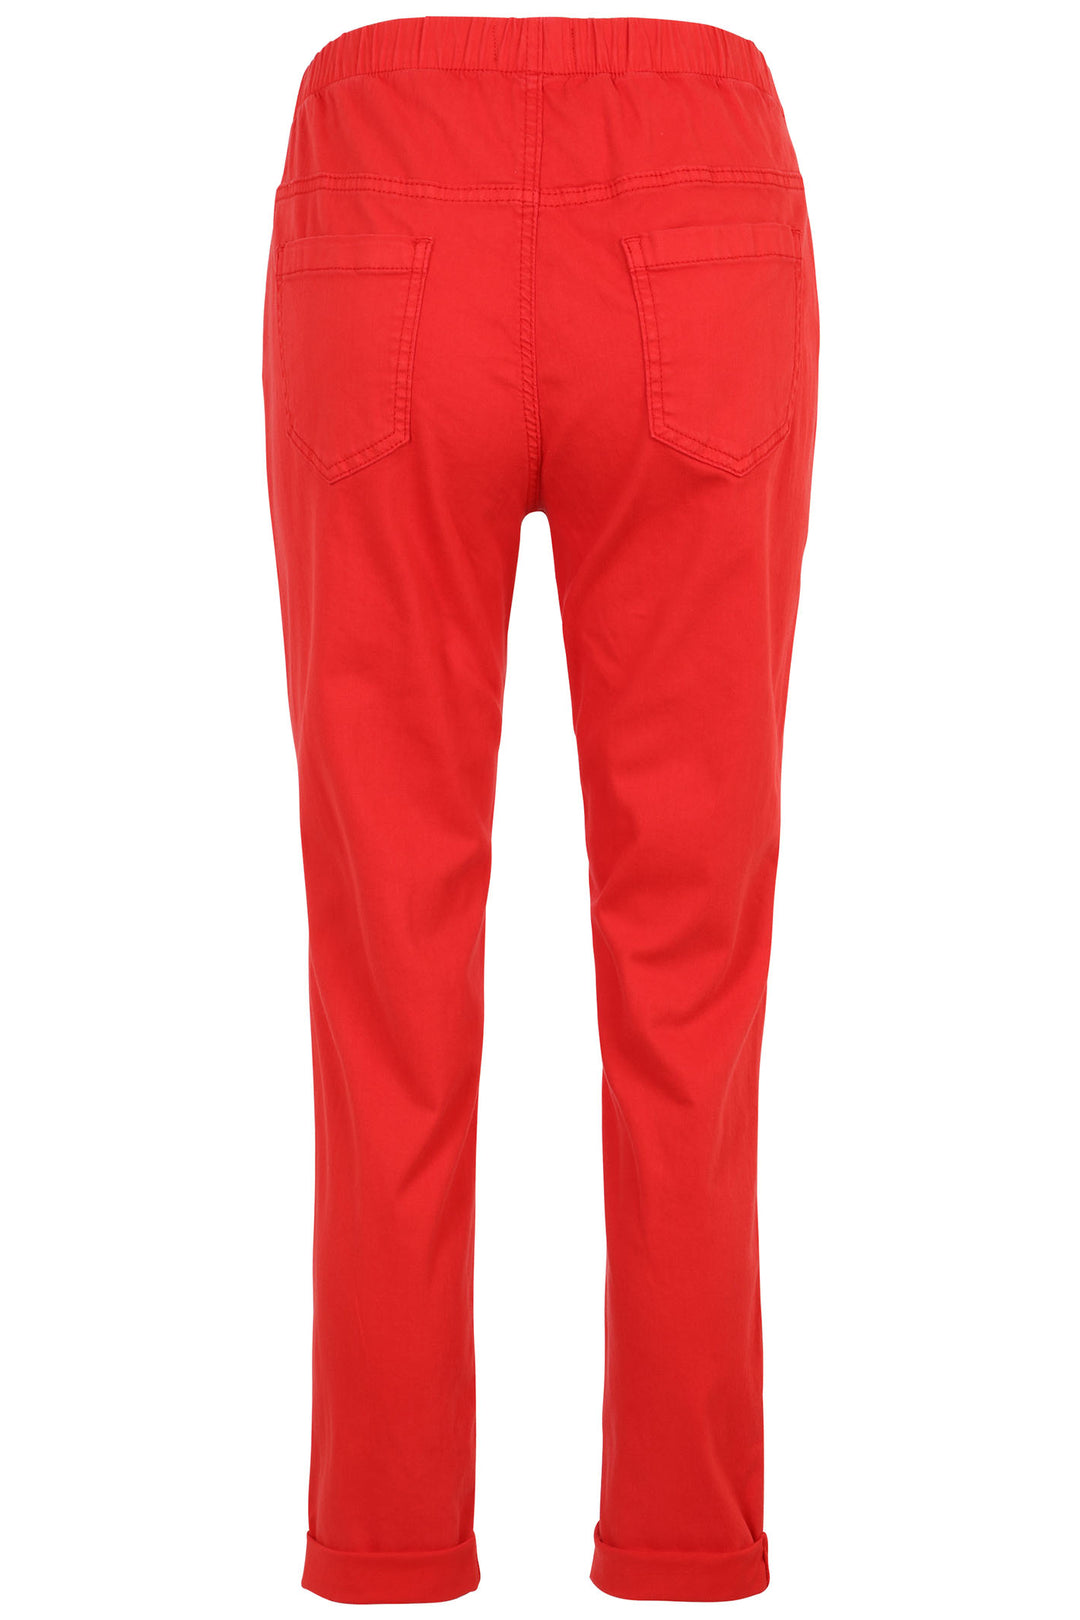 Doris Streich 807196 32 Red Stretch Cotton Pull-On Turn Up Trousers - Shirley Allum Boutique